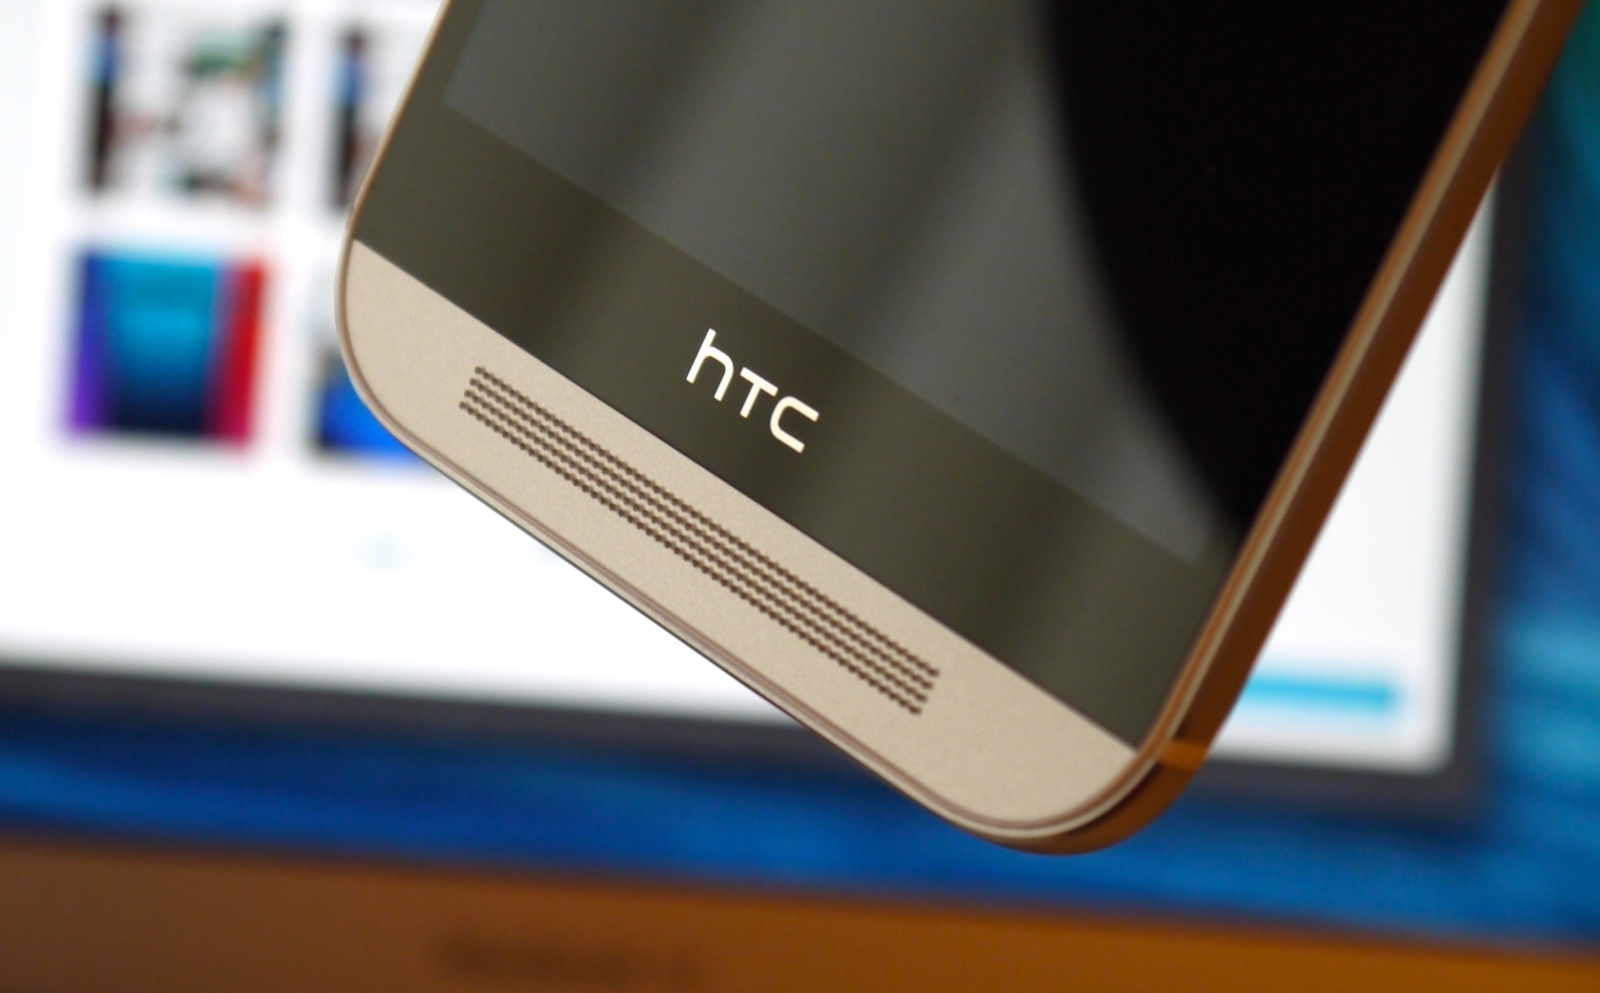 htcs-new-one-m10-looks-like-another-iphone-clone-image-cultofandroidcomwp-contentuploads201404HTC-logo-M8-jpg